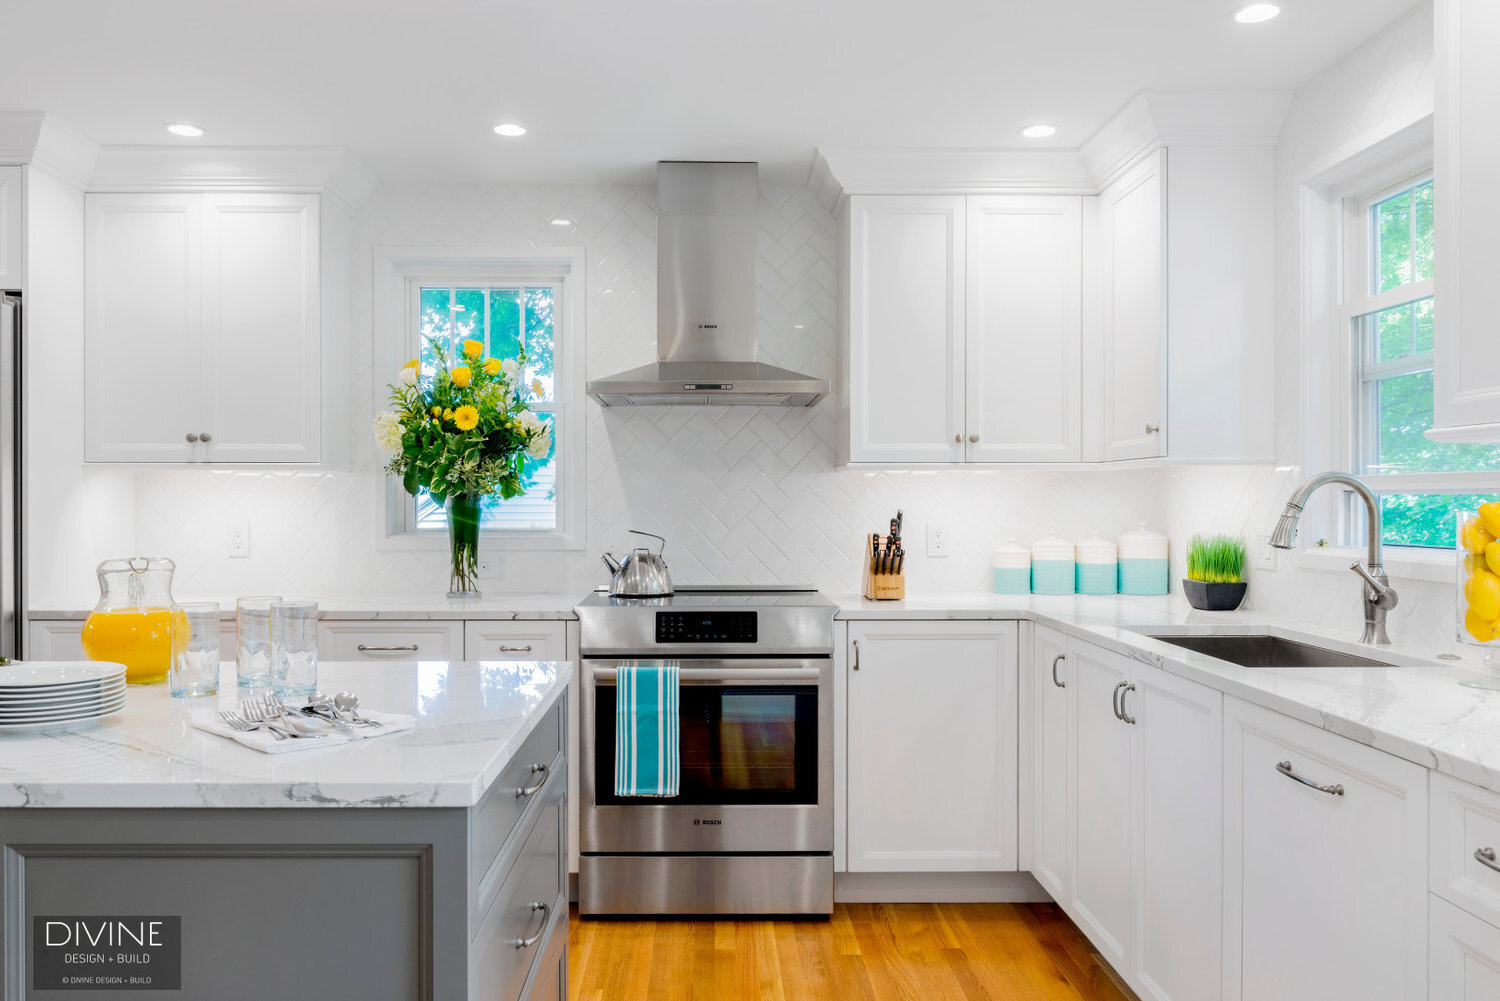 White and grey transitional style kitchen with shaker cabinets and stainless steel appliances. beveled subway tile backsplash in white. 